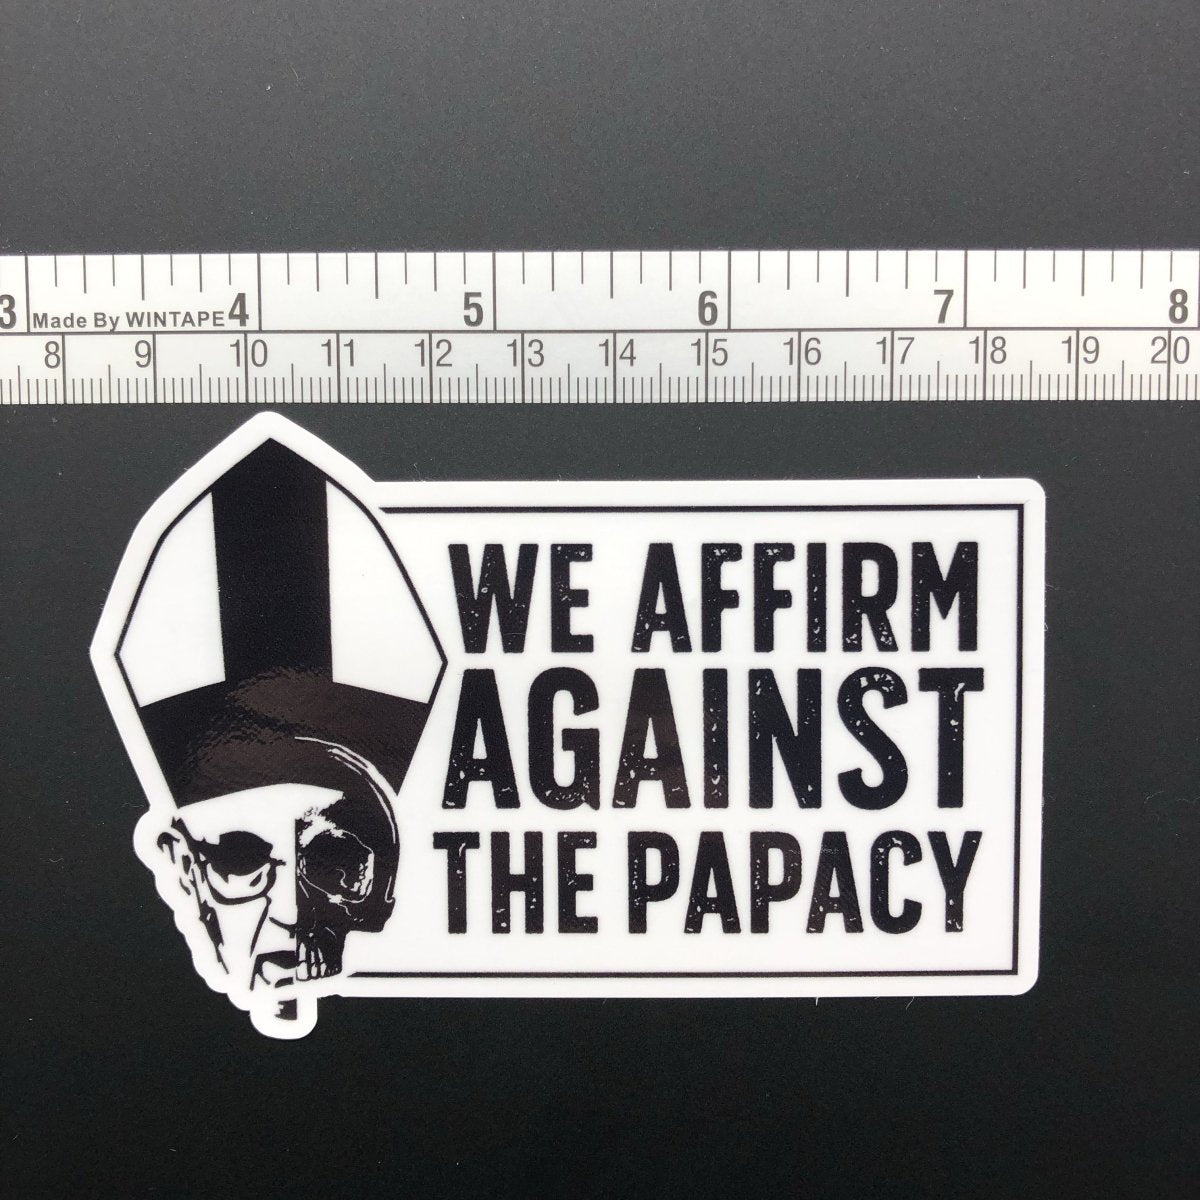 Decal - We Affirm Against The Papacy - Decal - The Reformed Sage - #reformed# - #reformed_gifts# - #christian_gifts#